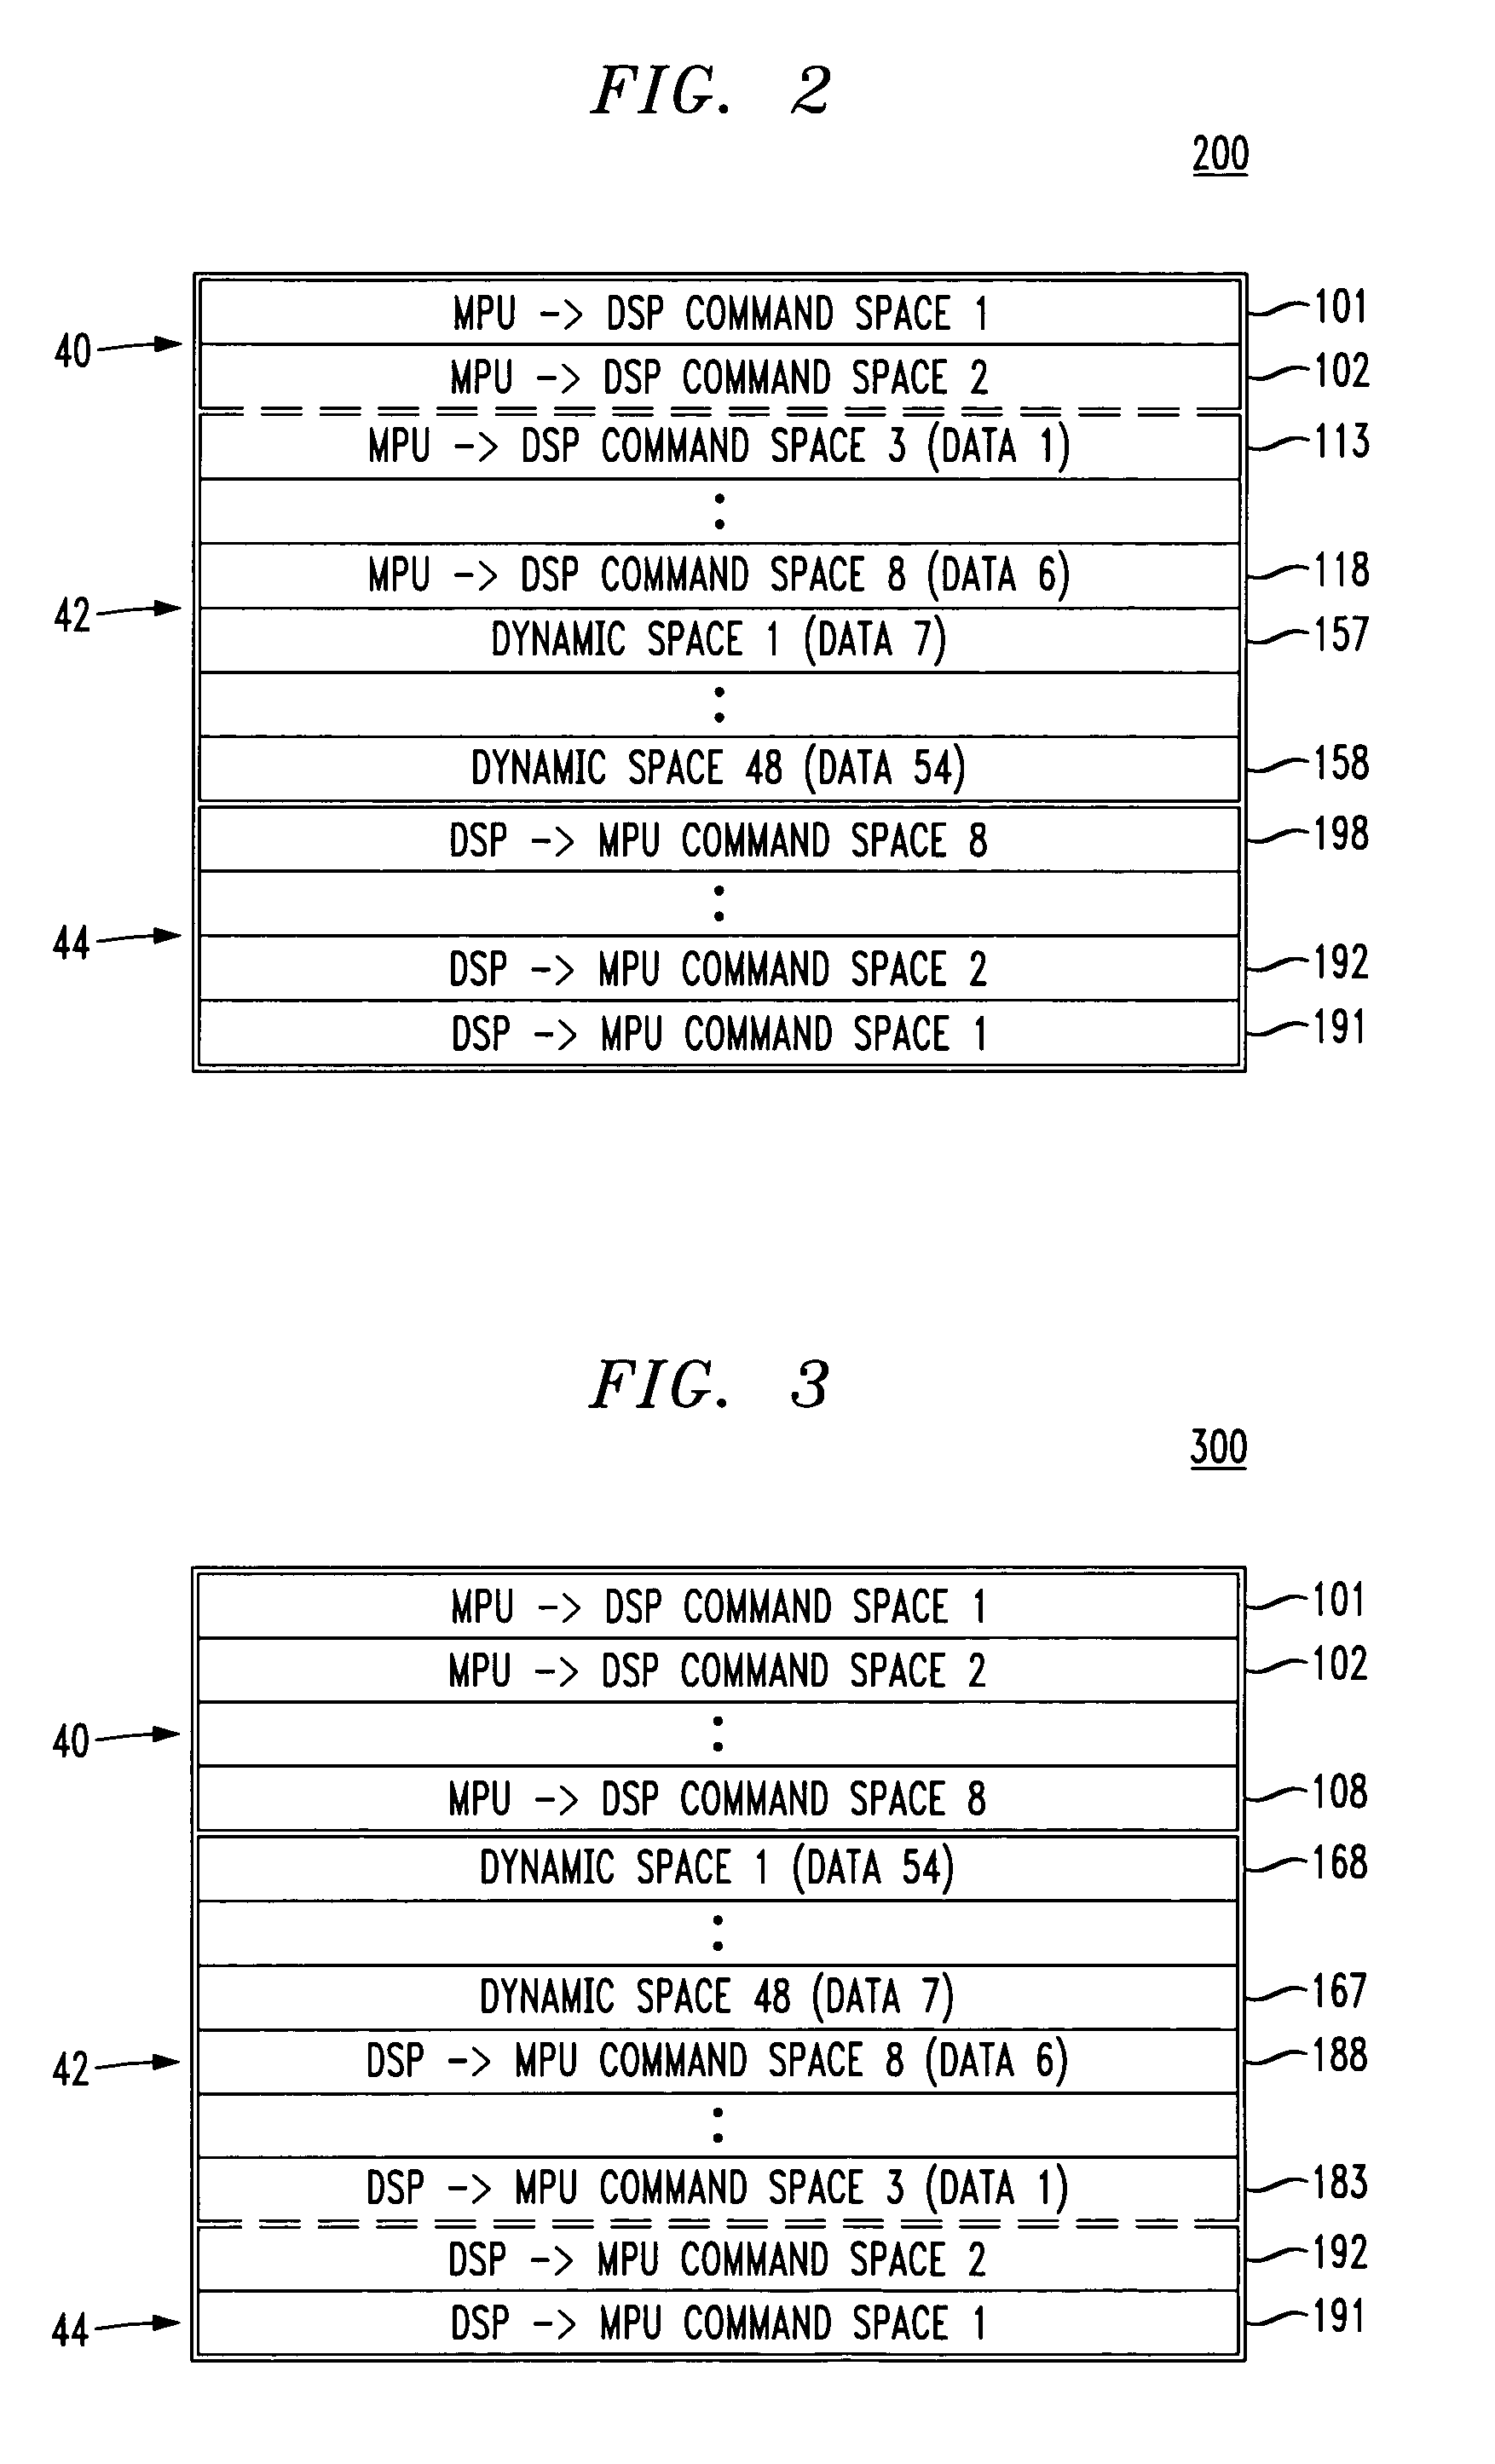 Maximized data space in shared memory between processors